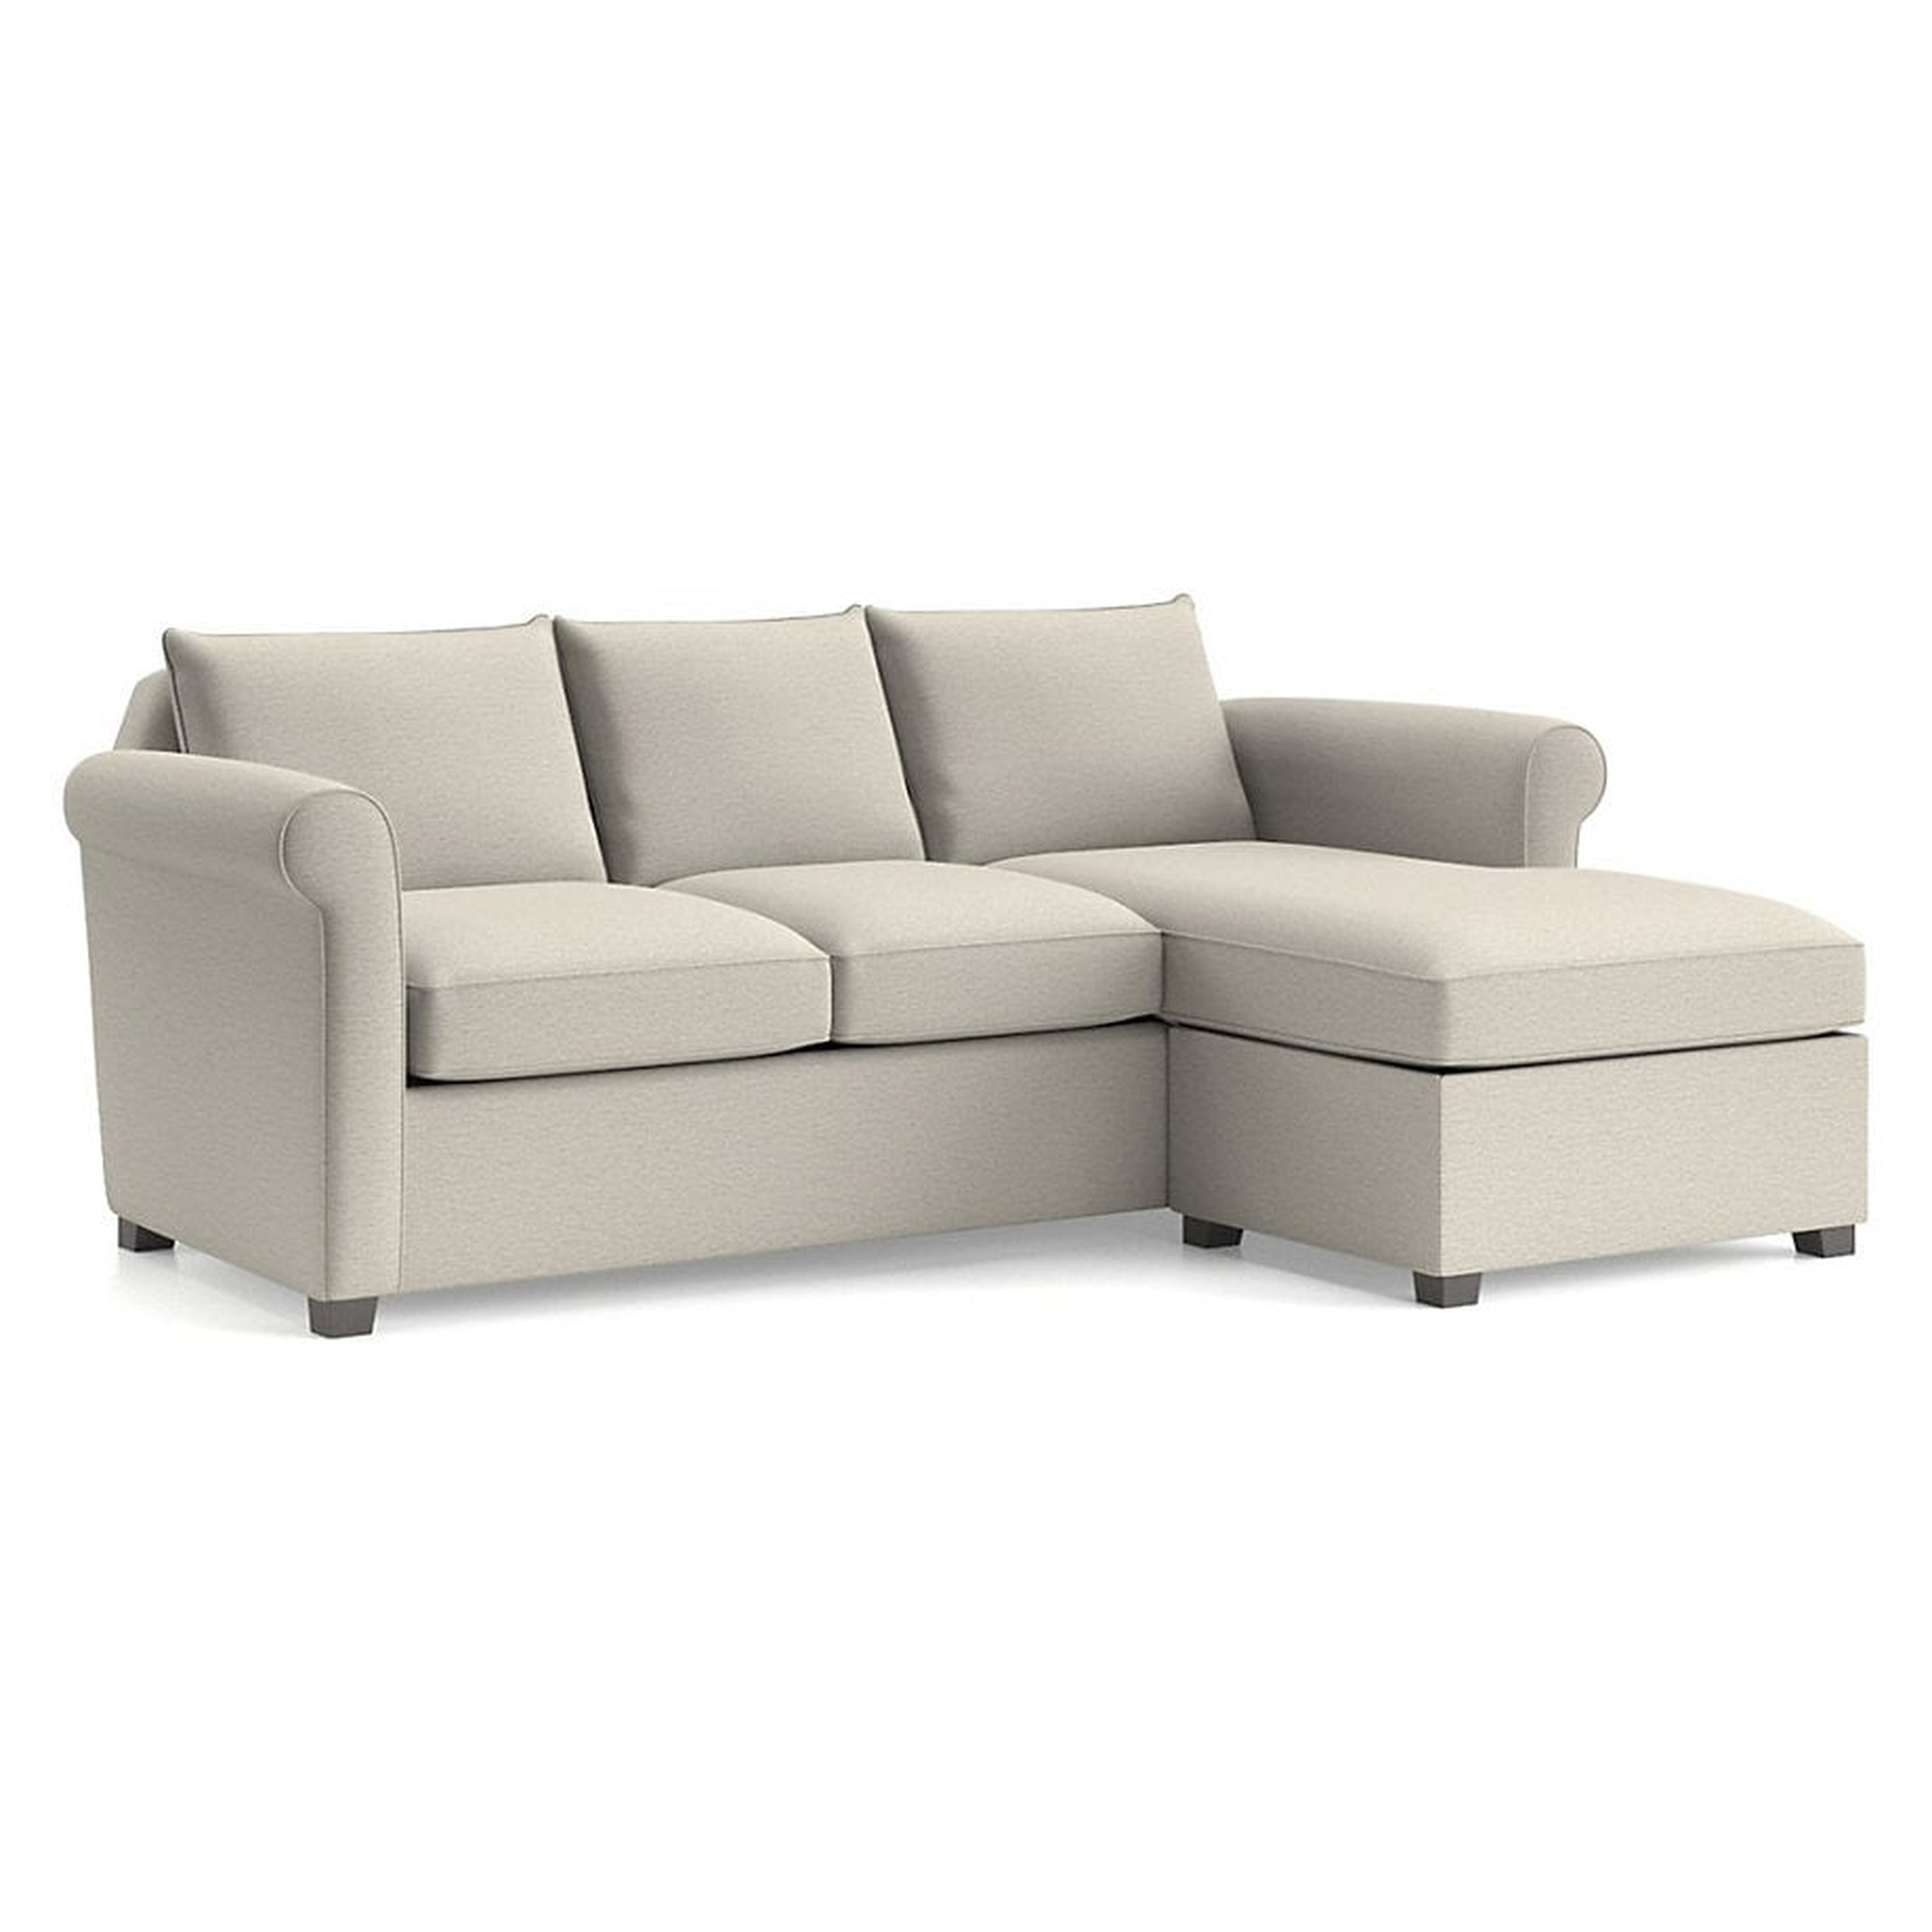 Hayward Rolled Arm Reversible Sectional - Crate and Barrel